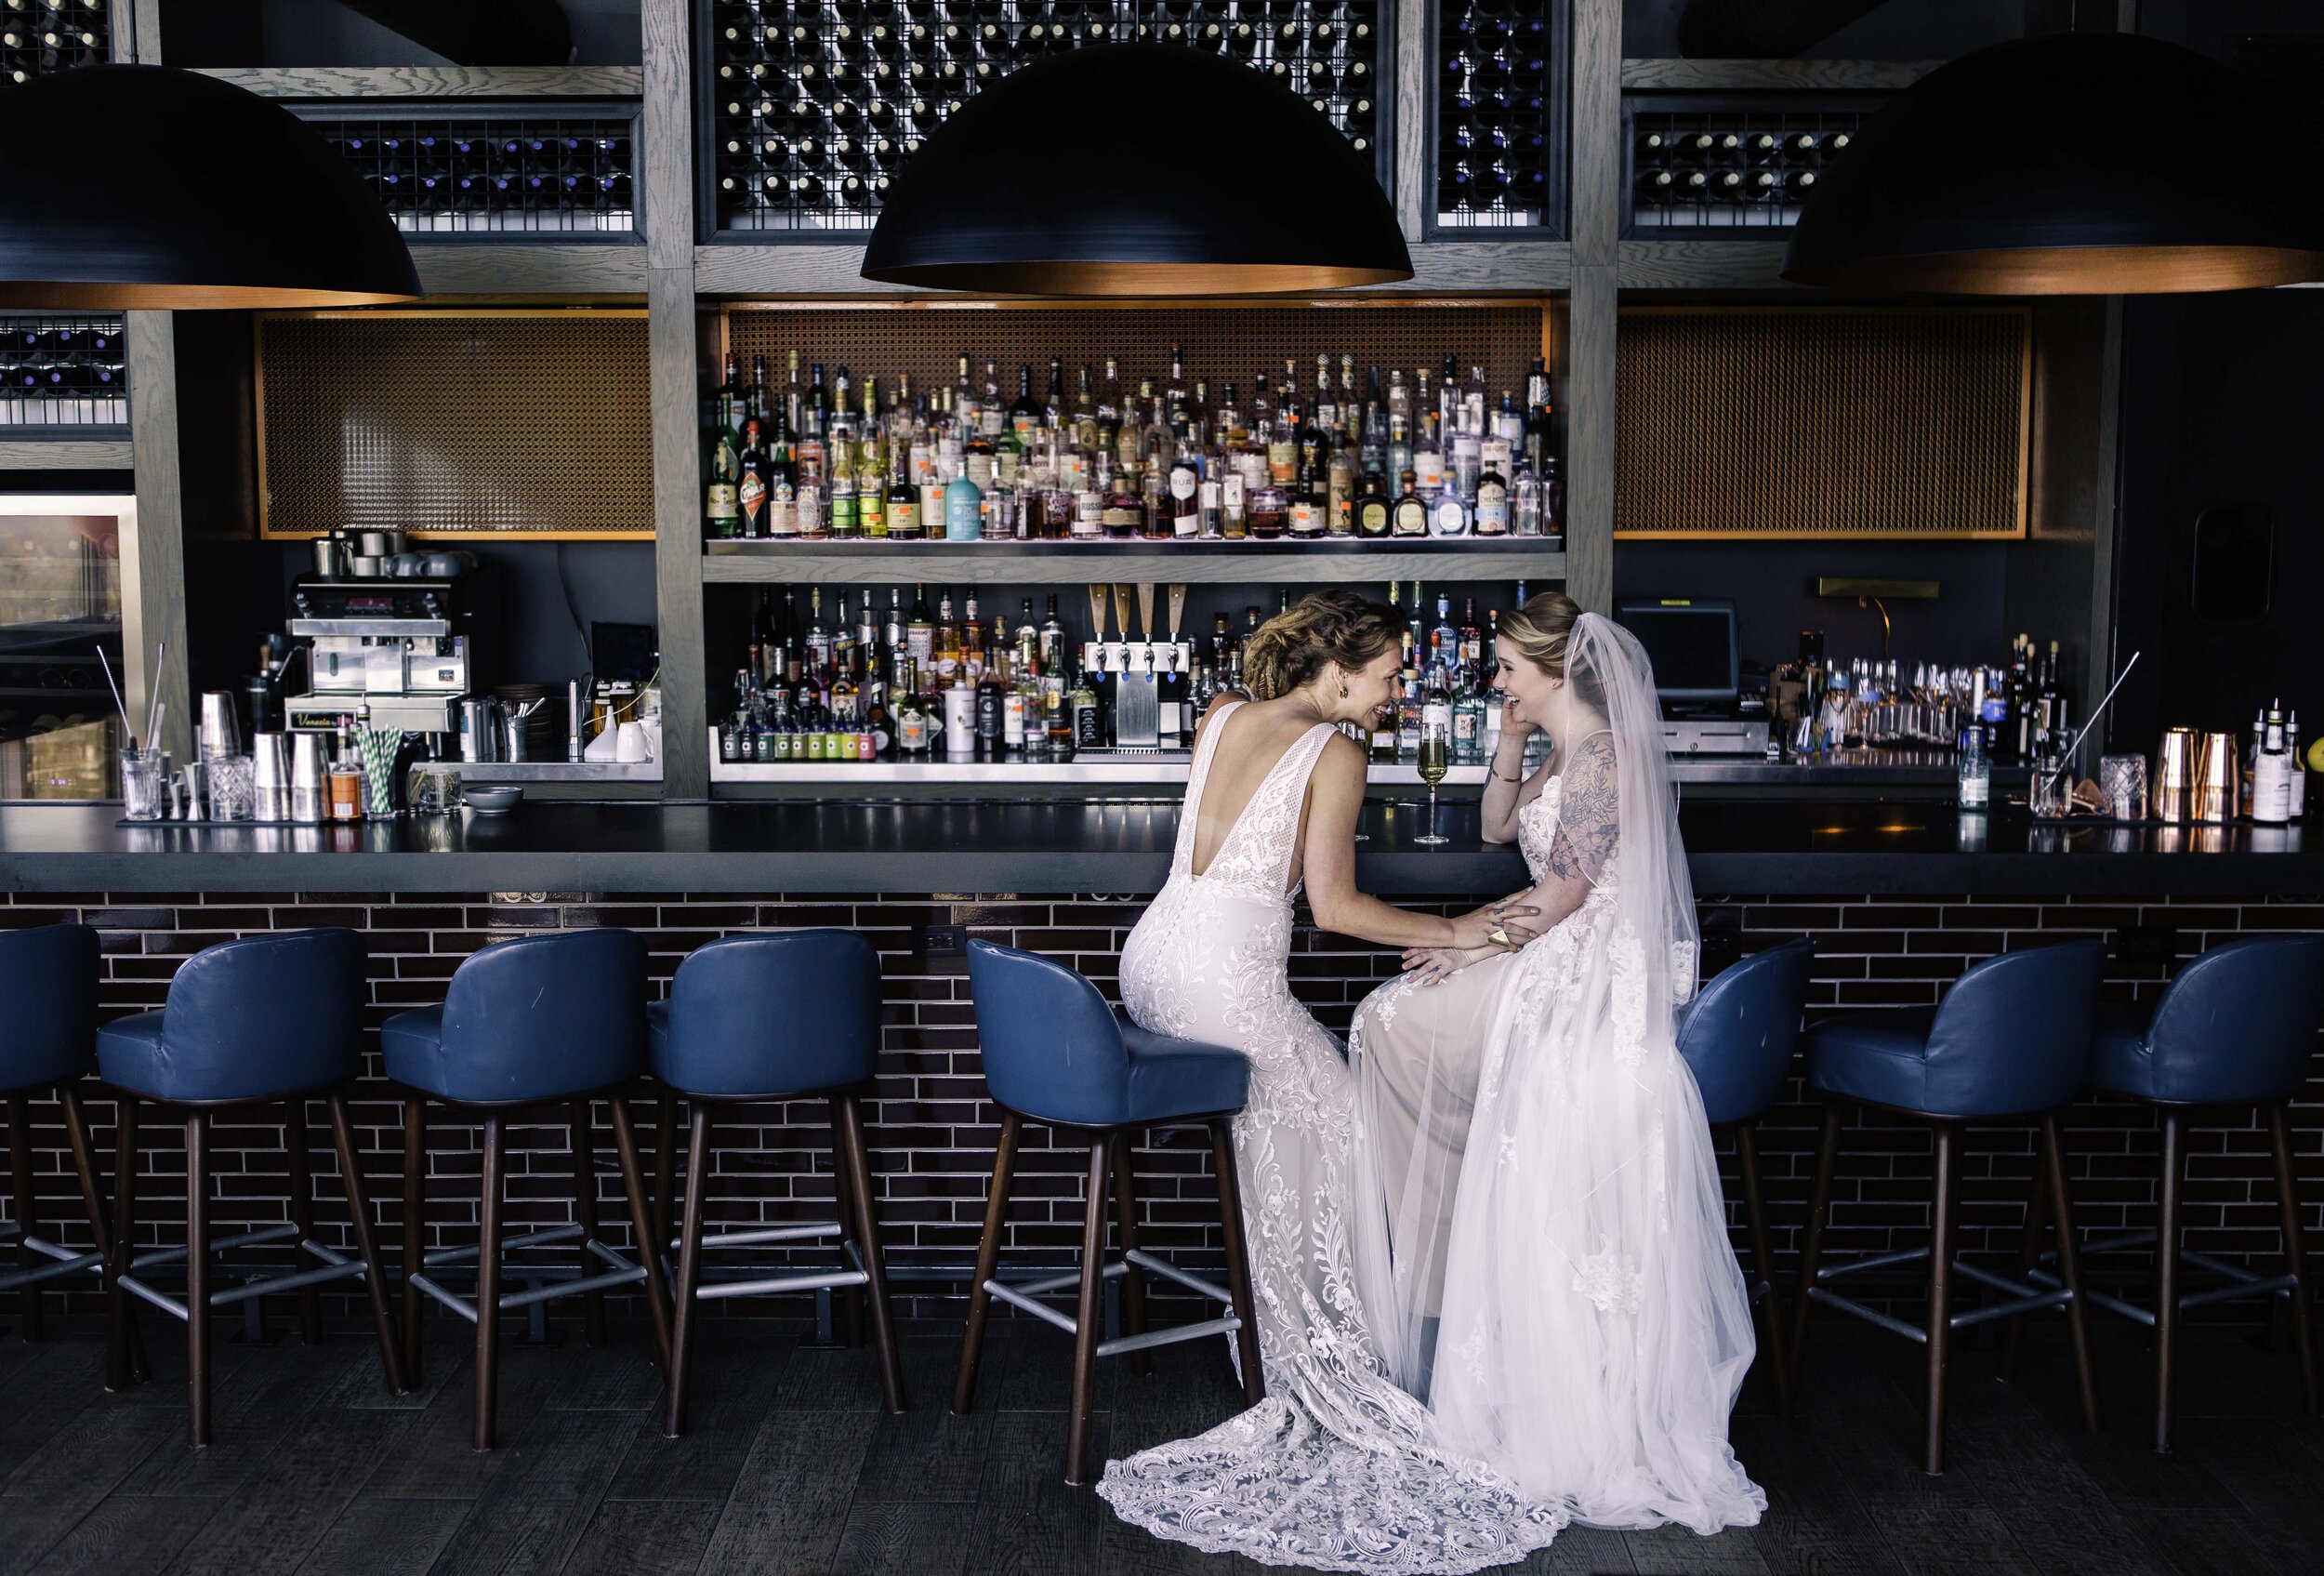 Double Bride Downtown Wedding_Eclipse Salon_Creative Director Britton Asheville_Misty Brooke and Leah Middleton Brides_Embellish jewelry_Wildflower Bridal_Heather Smith_Cordial and Craft_Hyatt Place Downtown Asheville_Studio Misha Photography-9_sm.jpg